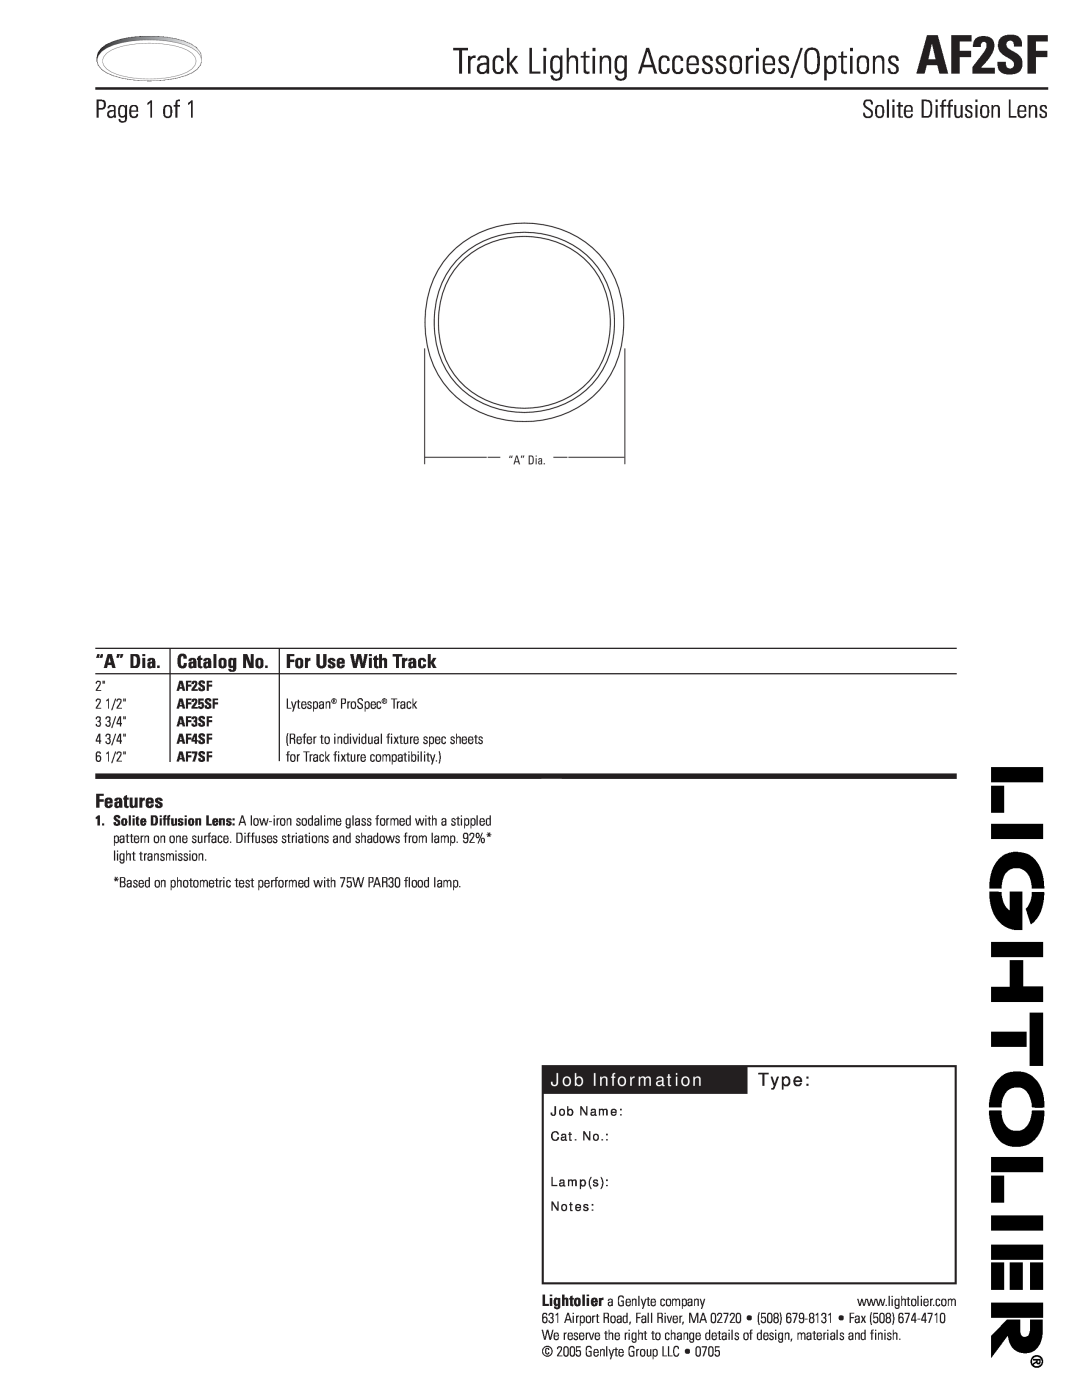 Lightolier manual Track Lighting Accessories/Options AF2SF, Page 1 of, Solite Diffusion Lens, “A” Dia, Features, Type 